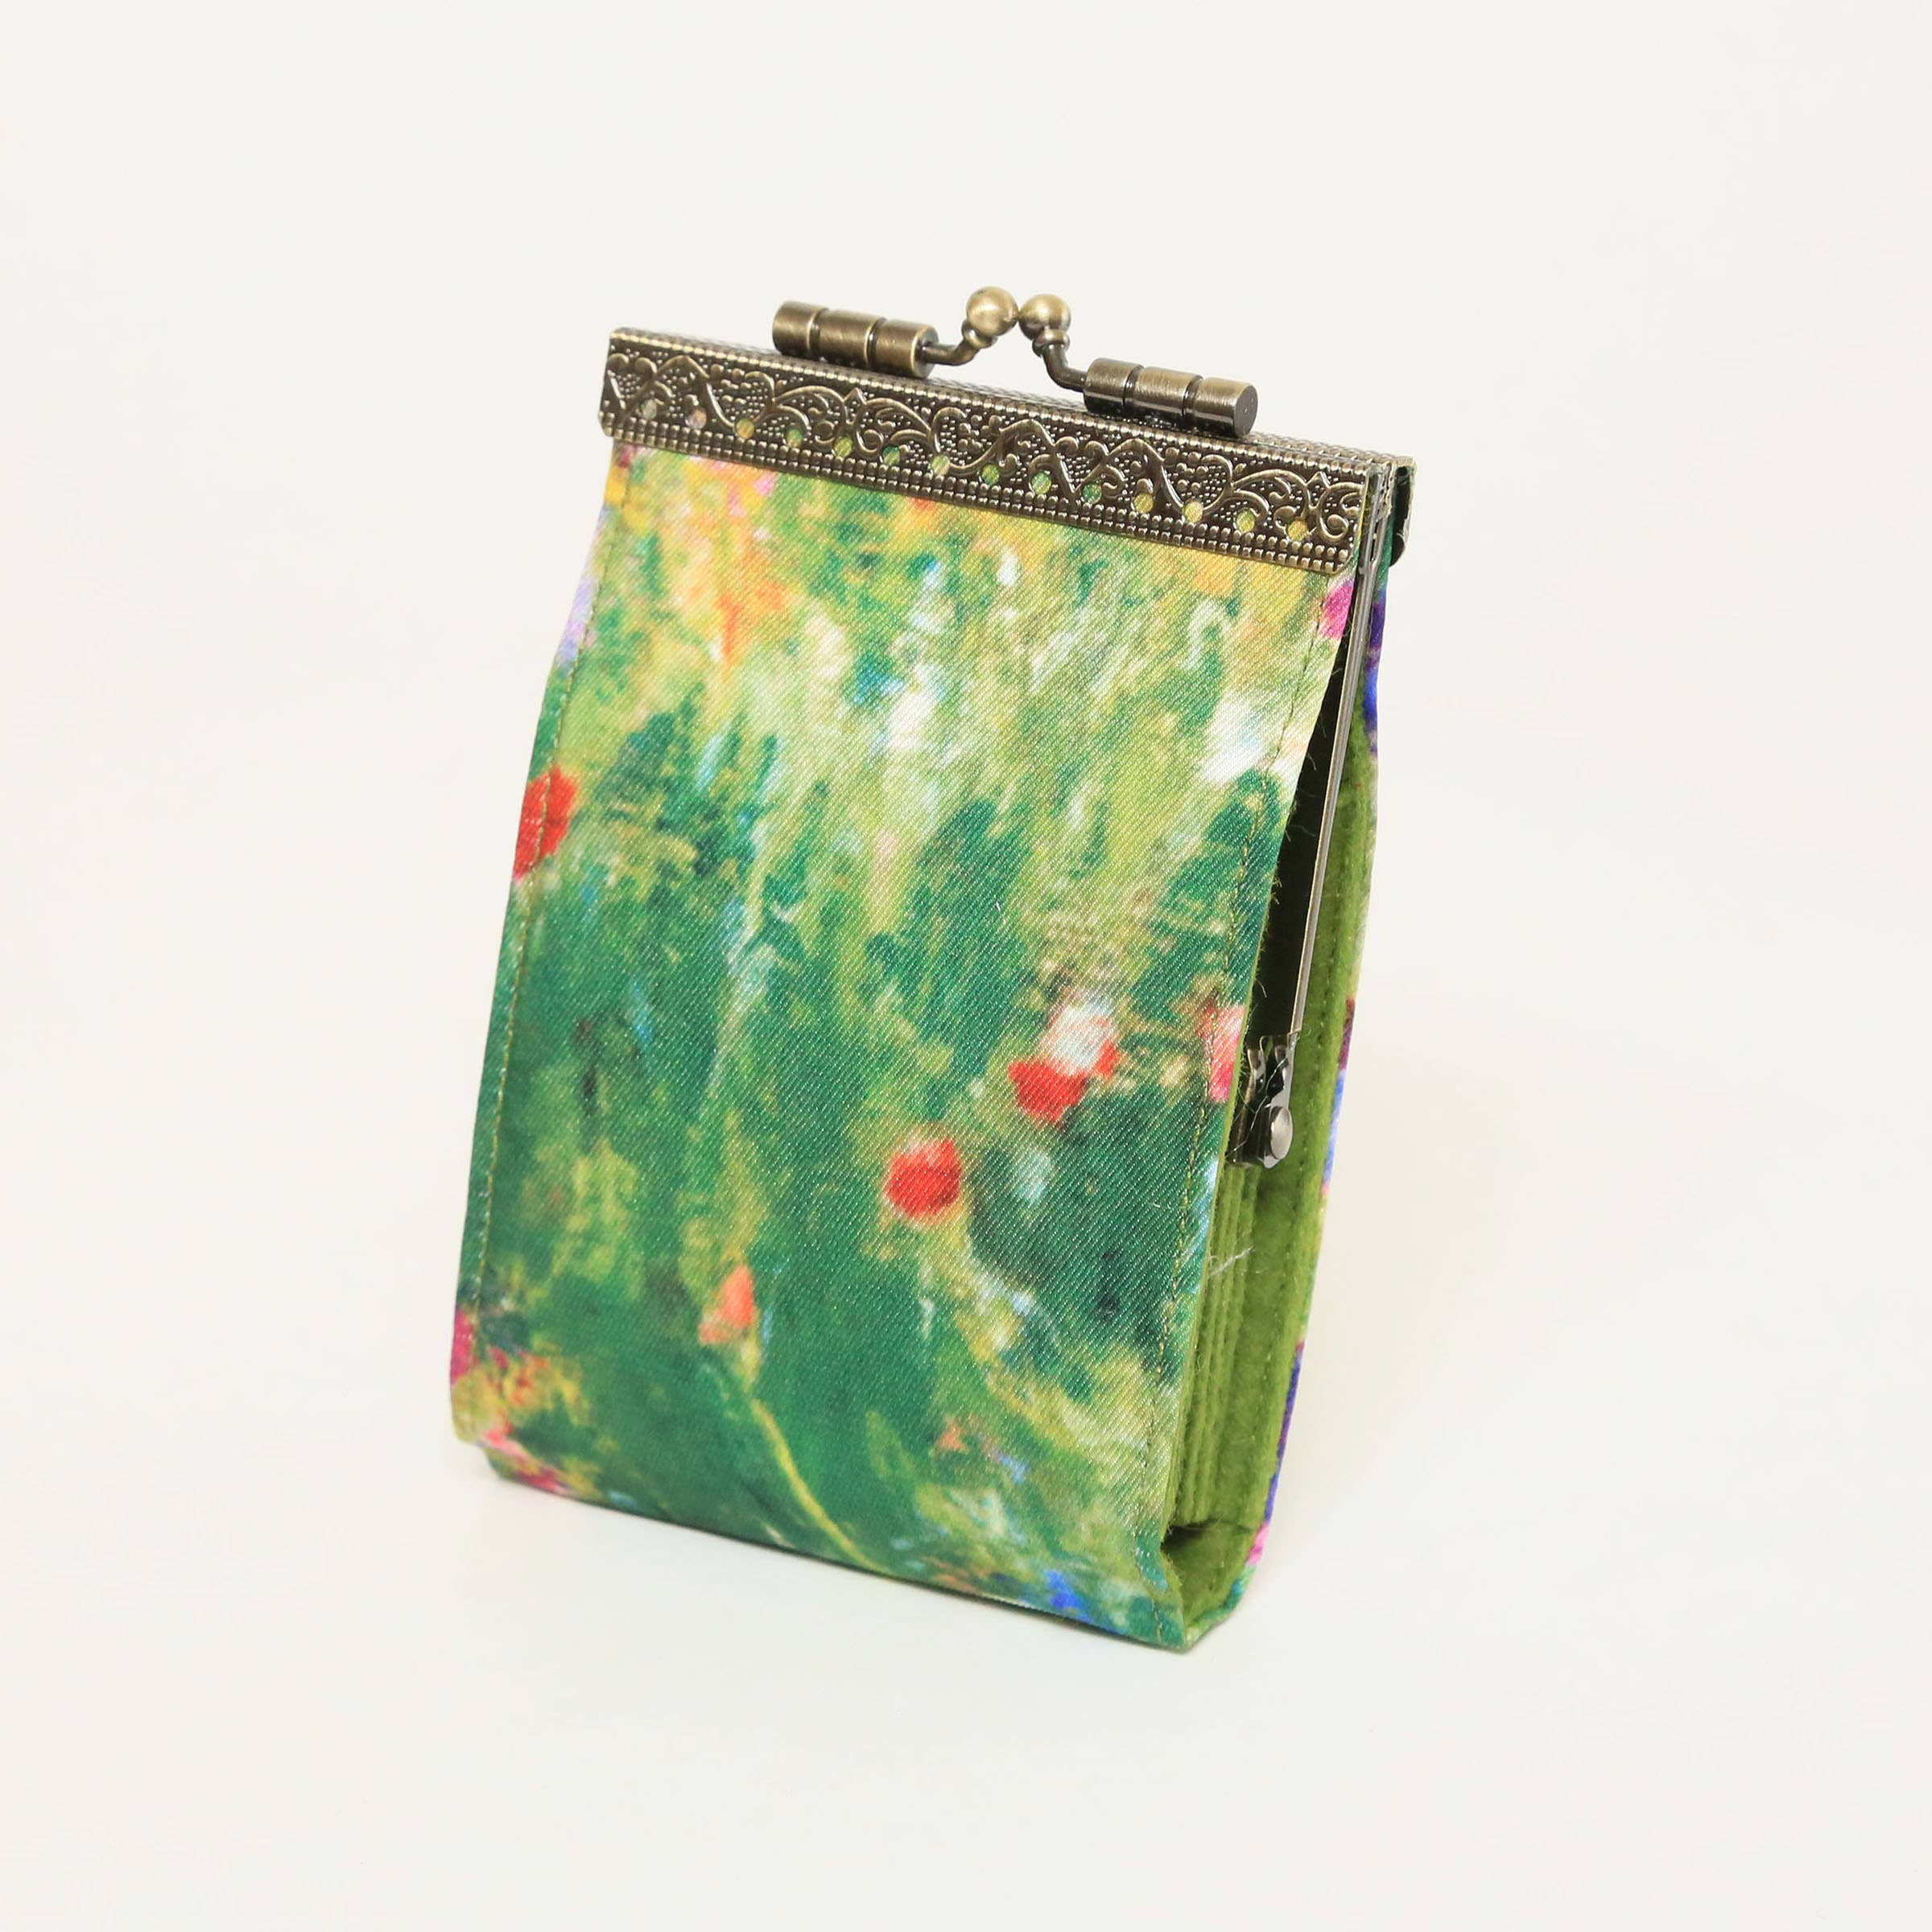 Artist Painting Prints, Card Holder with RFID Protection: Monet Alice Garden - Out of the Blue